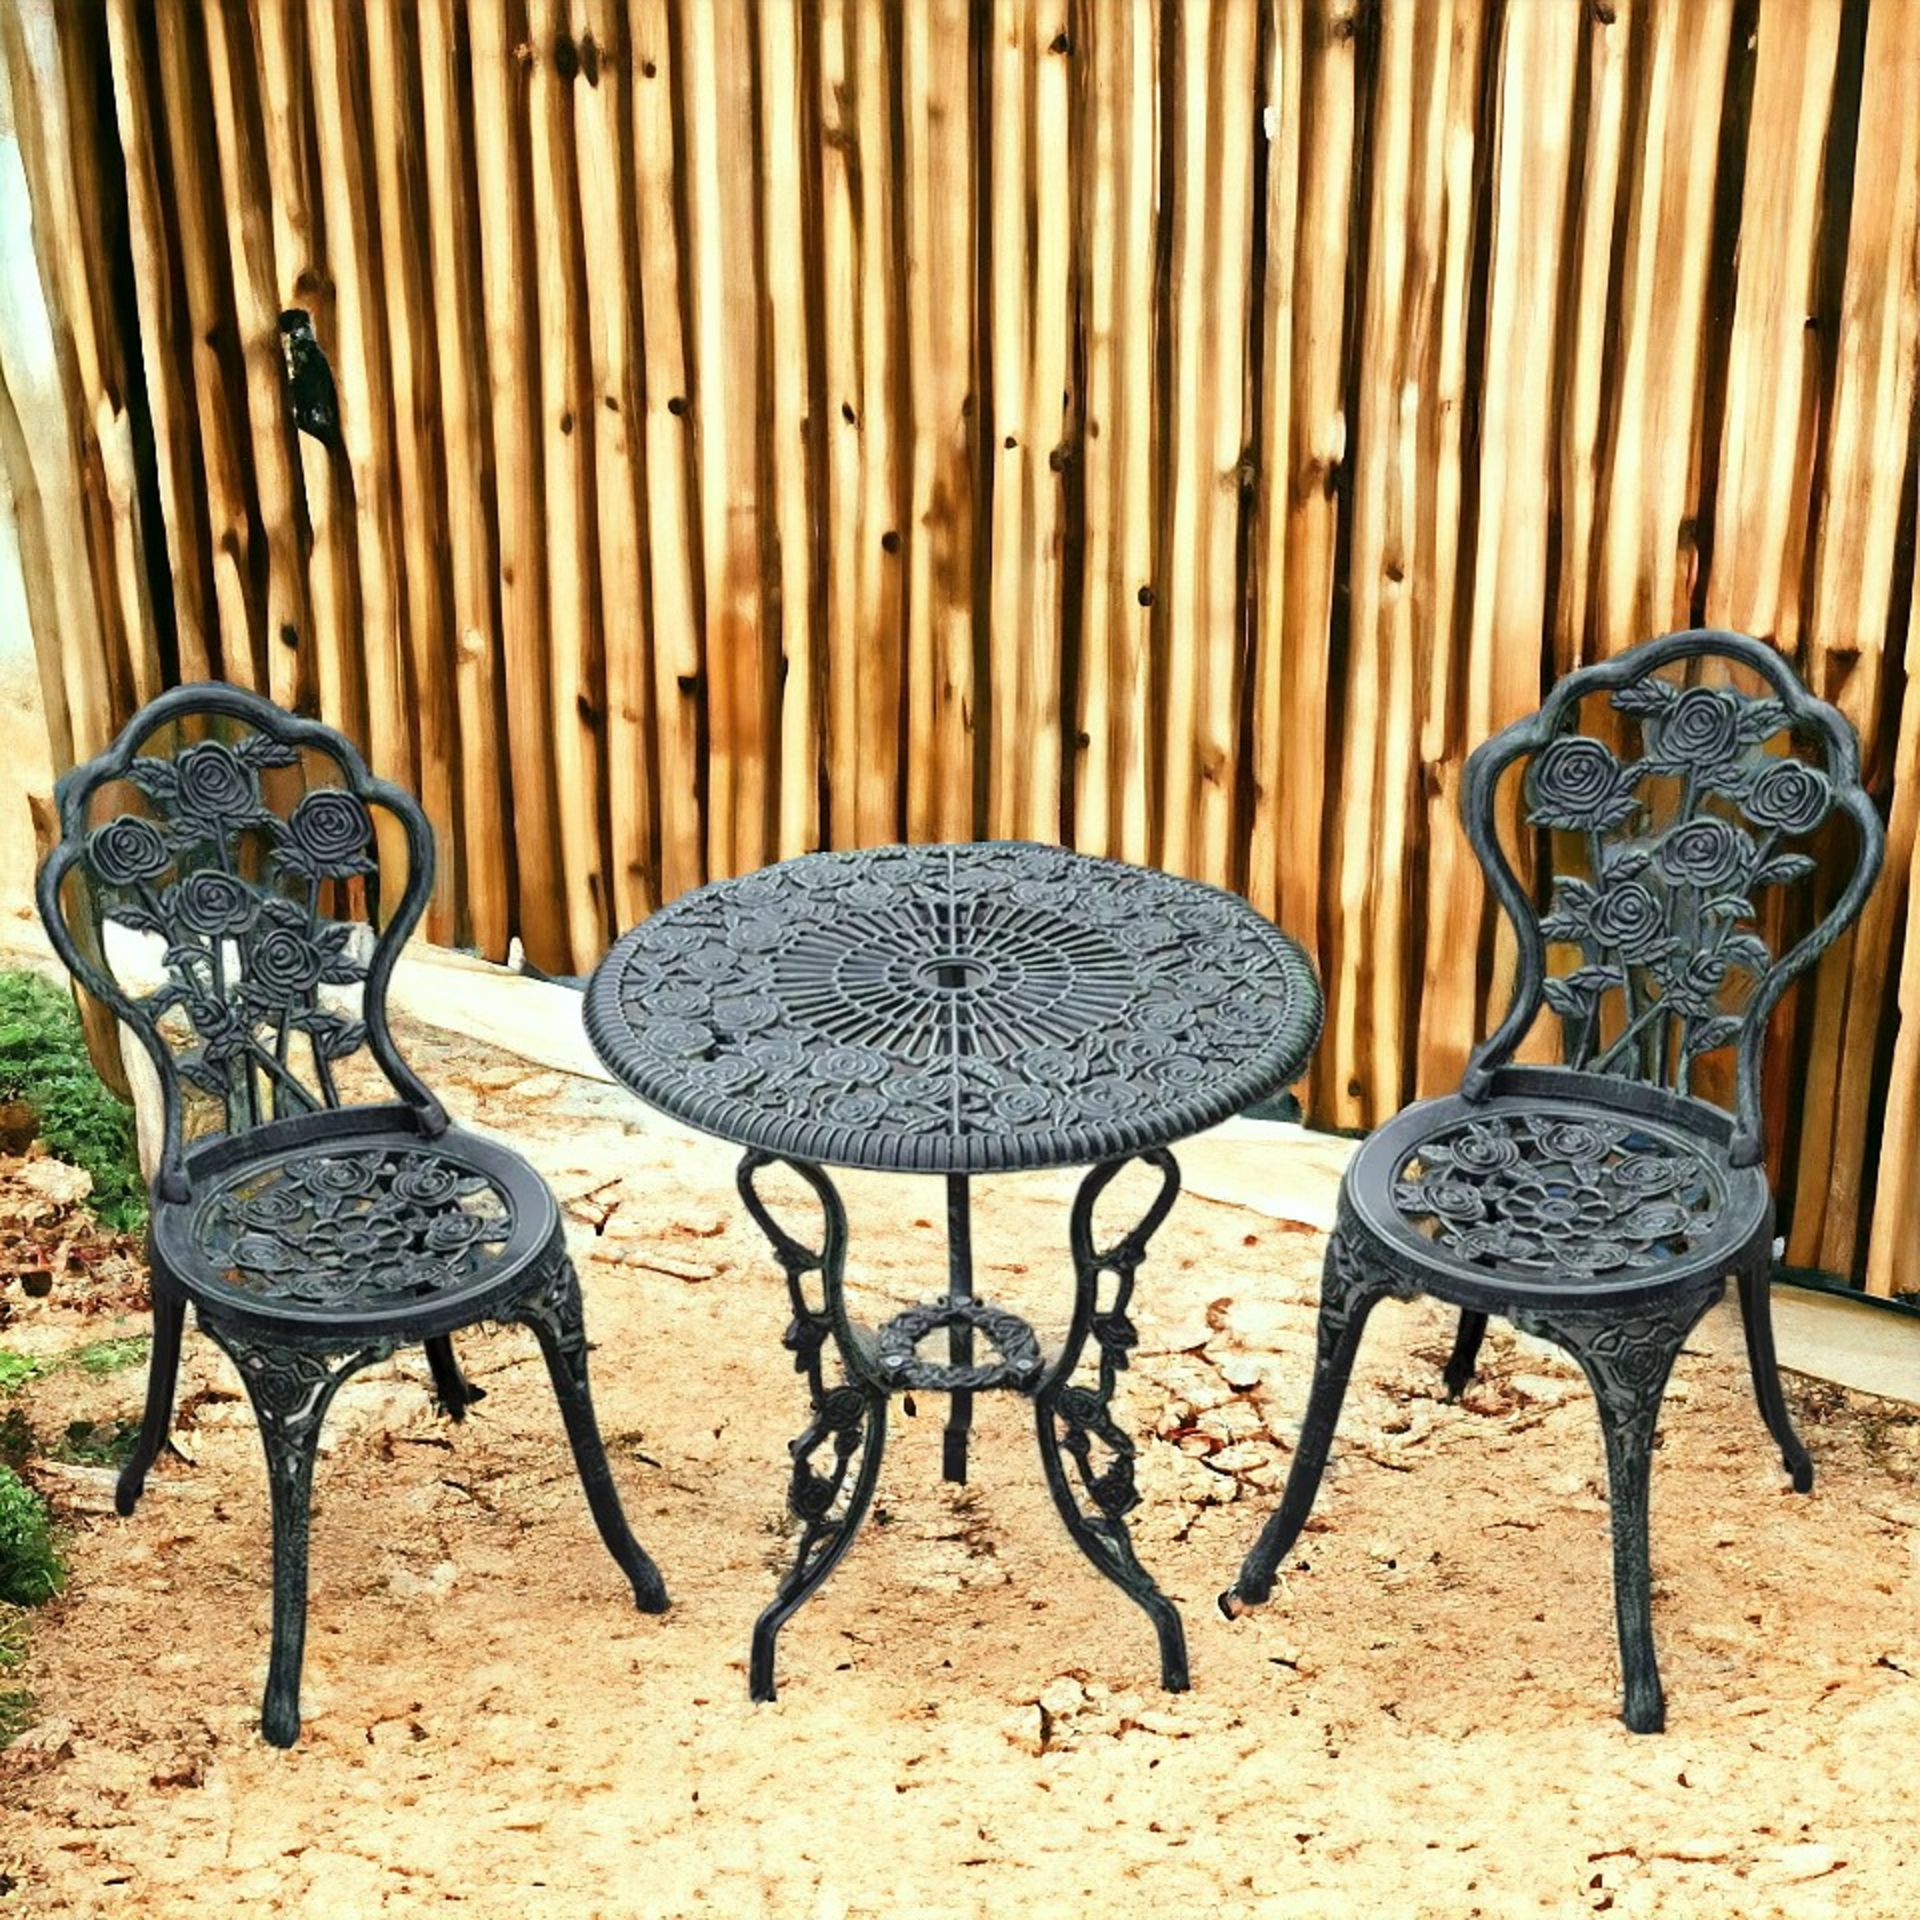 FREE DELIVERY- BRAND NEW 3 PIECES BISTRO SET FURNITURE GARDEN BALCONY TABLE 2 CHAIRS GREEN - Bild 2 aus 2